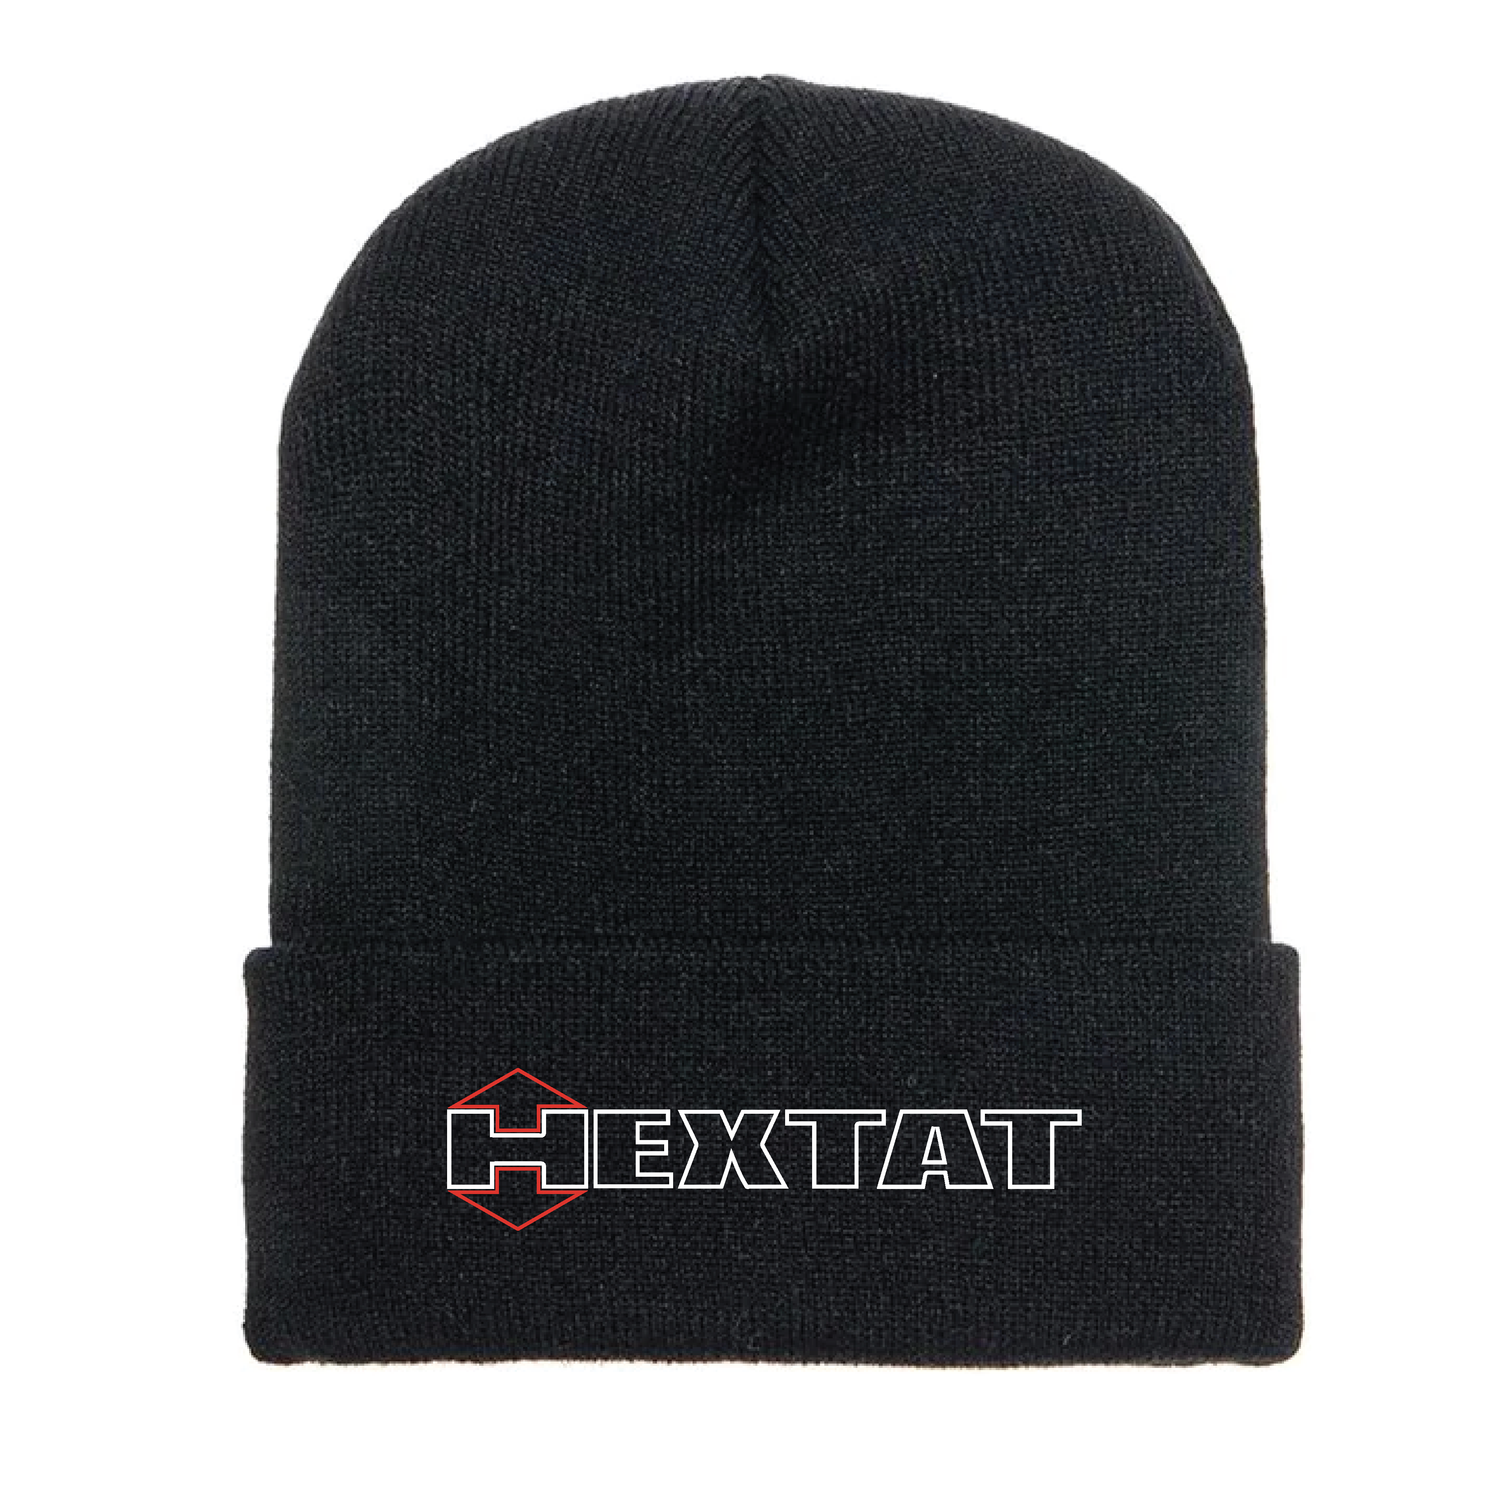 Hextat Logo - Embroidered Knit Beanie